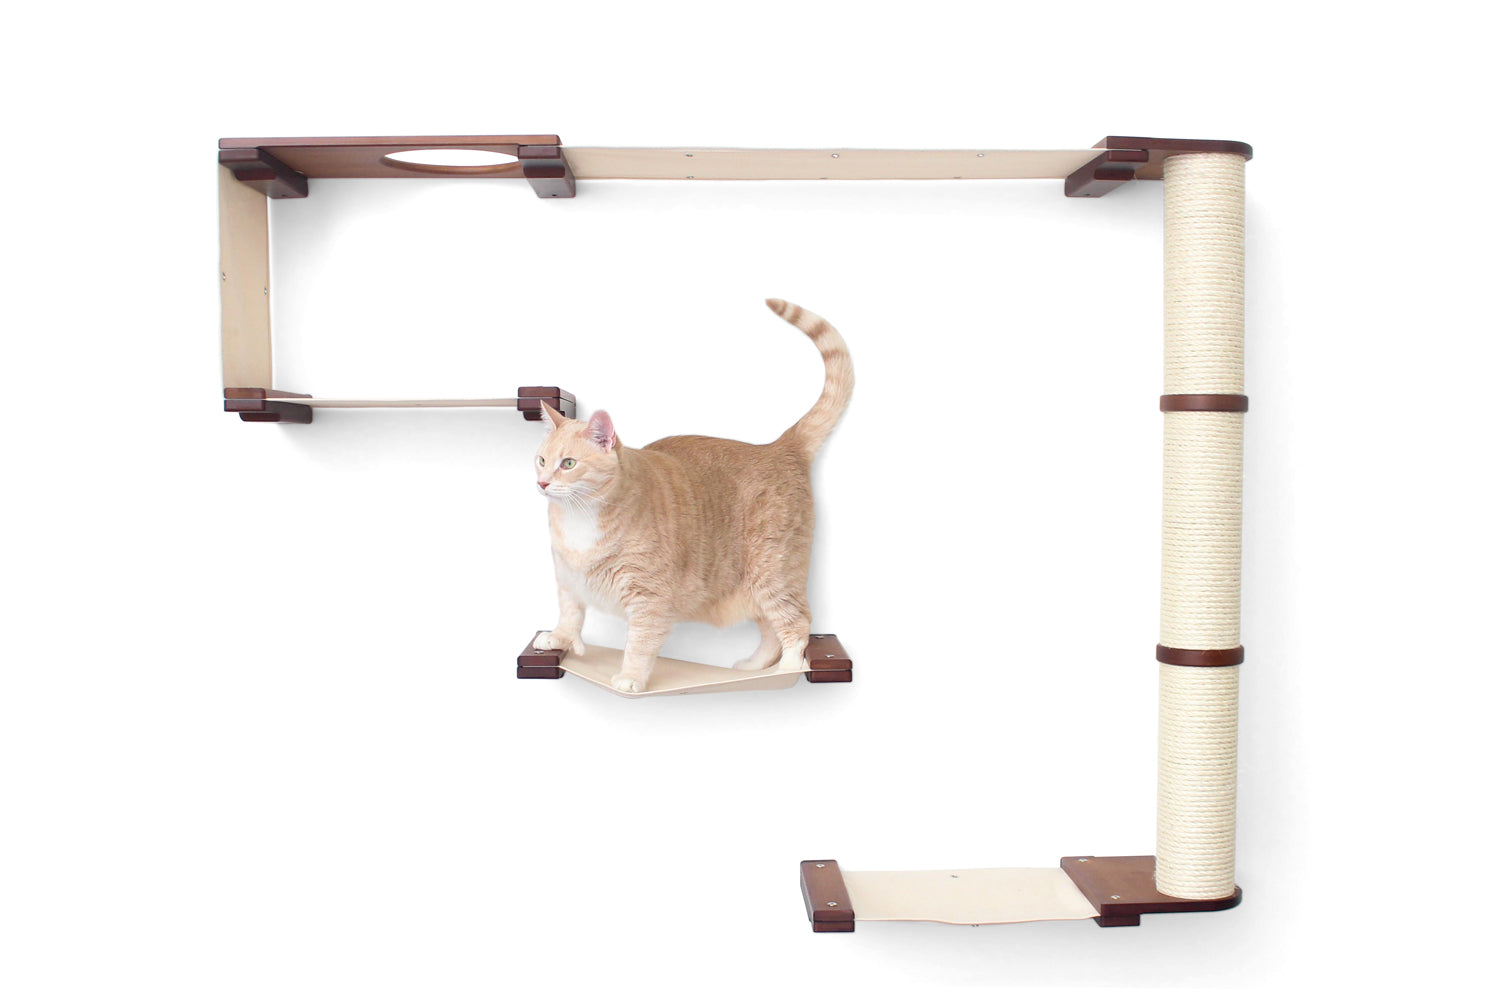 The Climb Cat Condo Wall-Mounted Catastrophic Creations